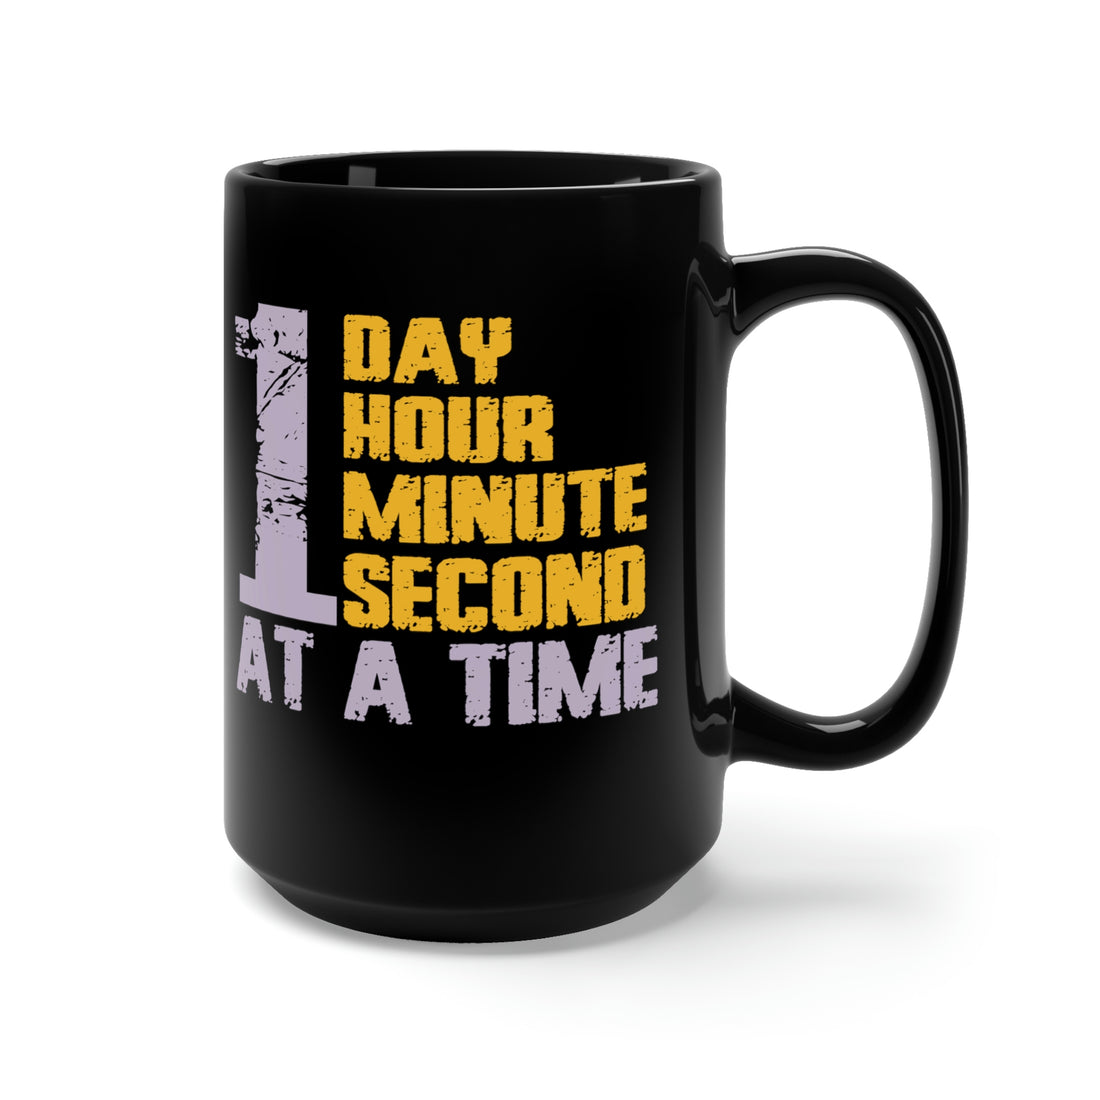 1 Day Hour Minute Second At A Time - Large 15oz Black Mug